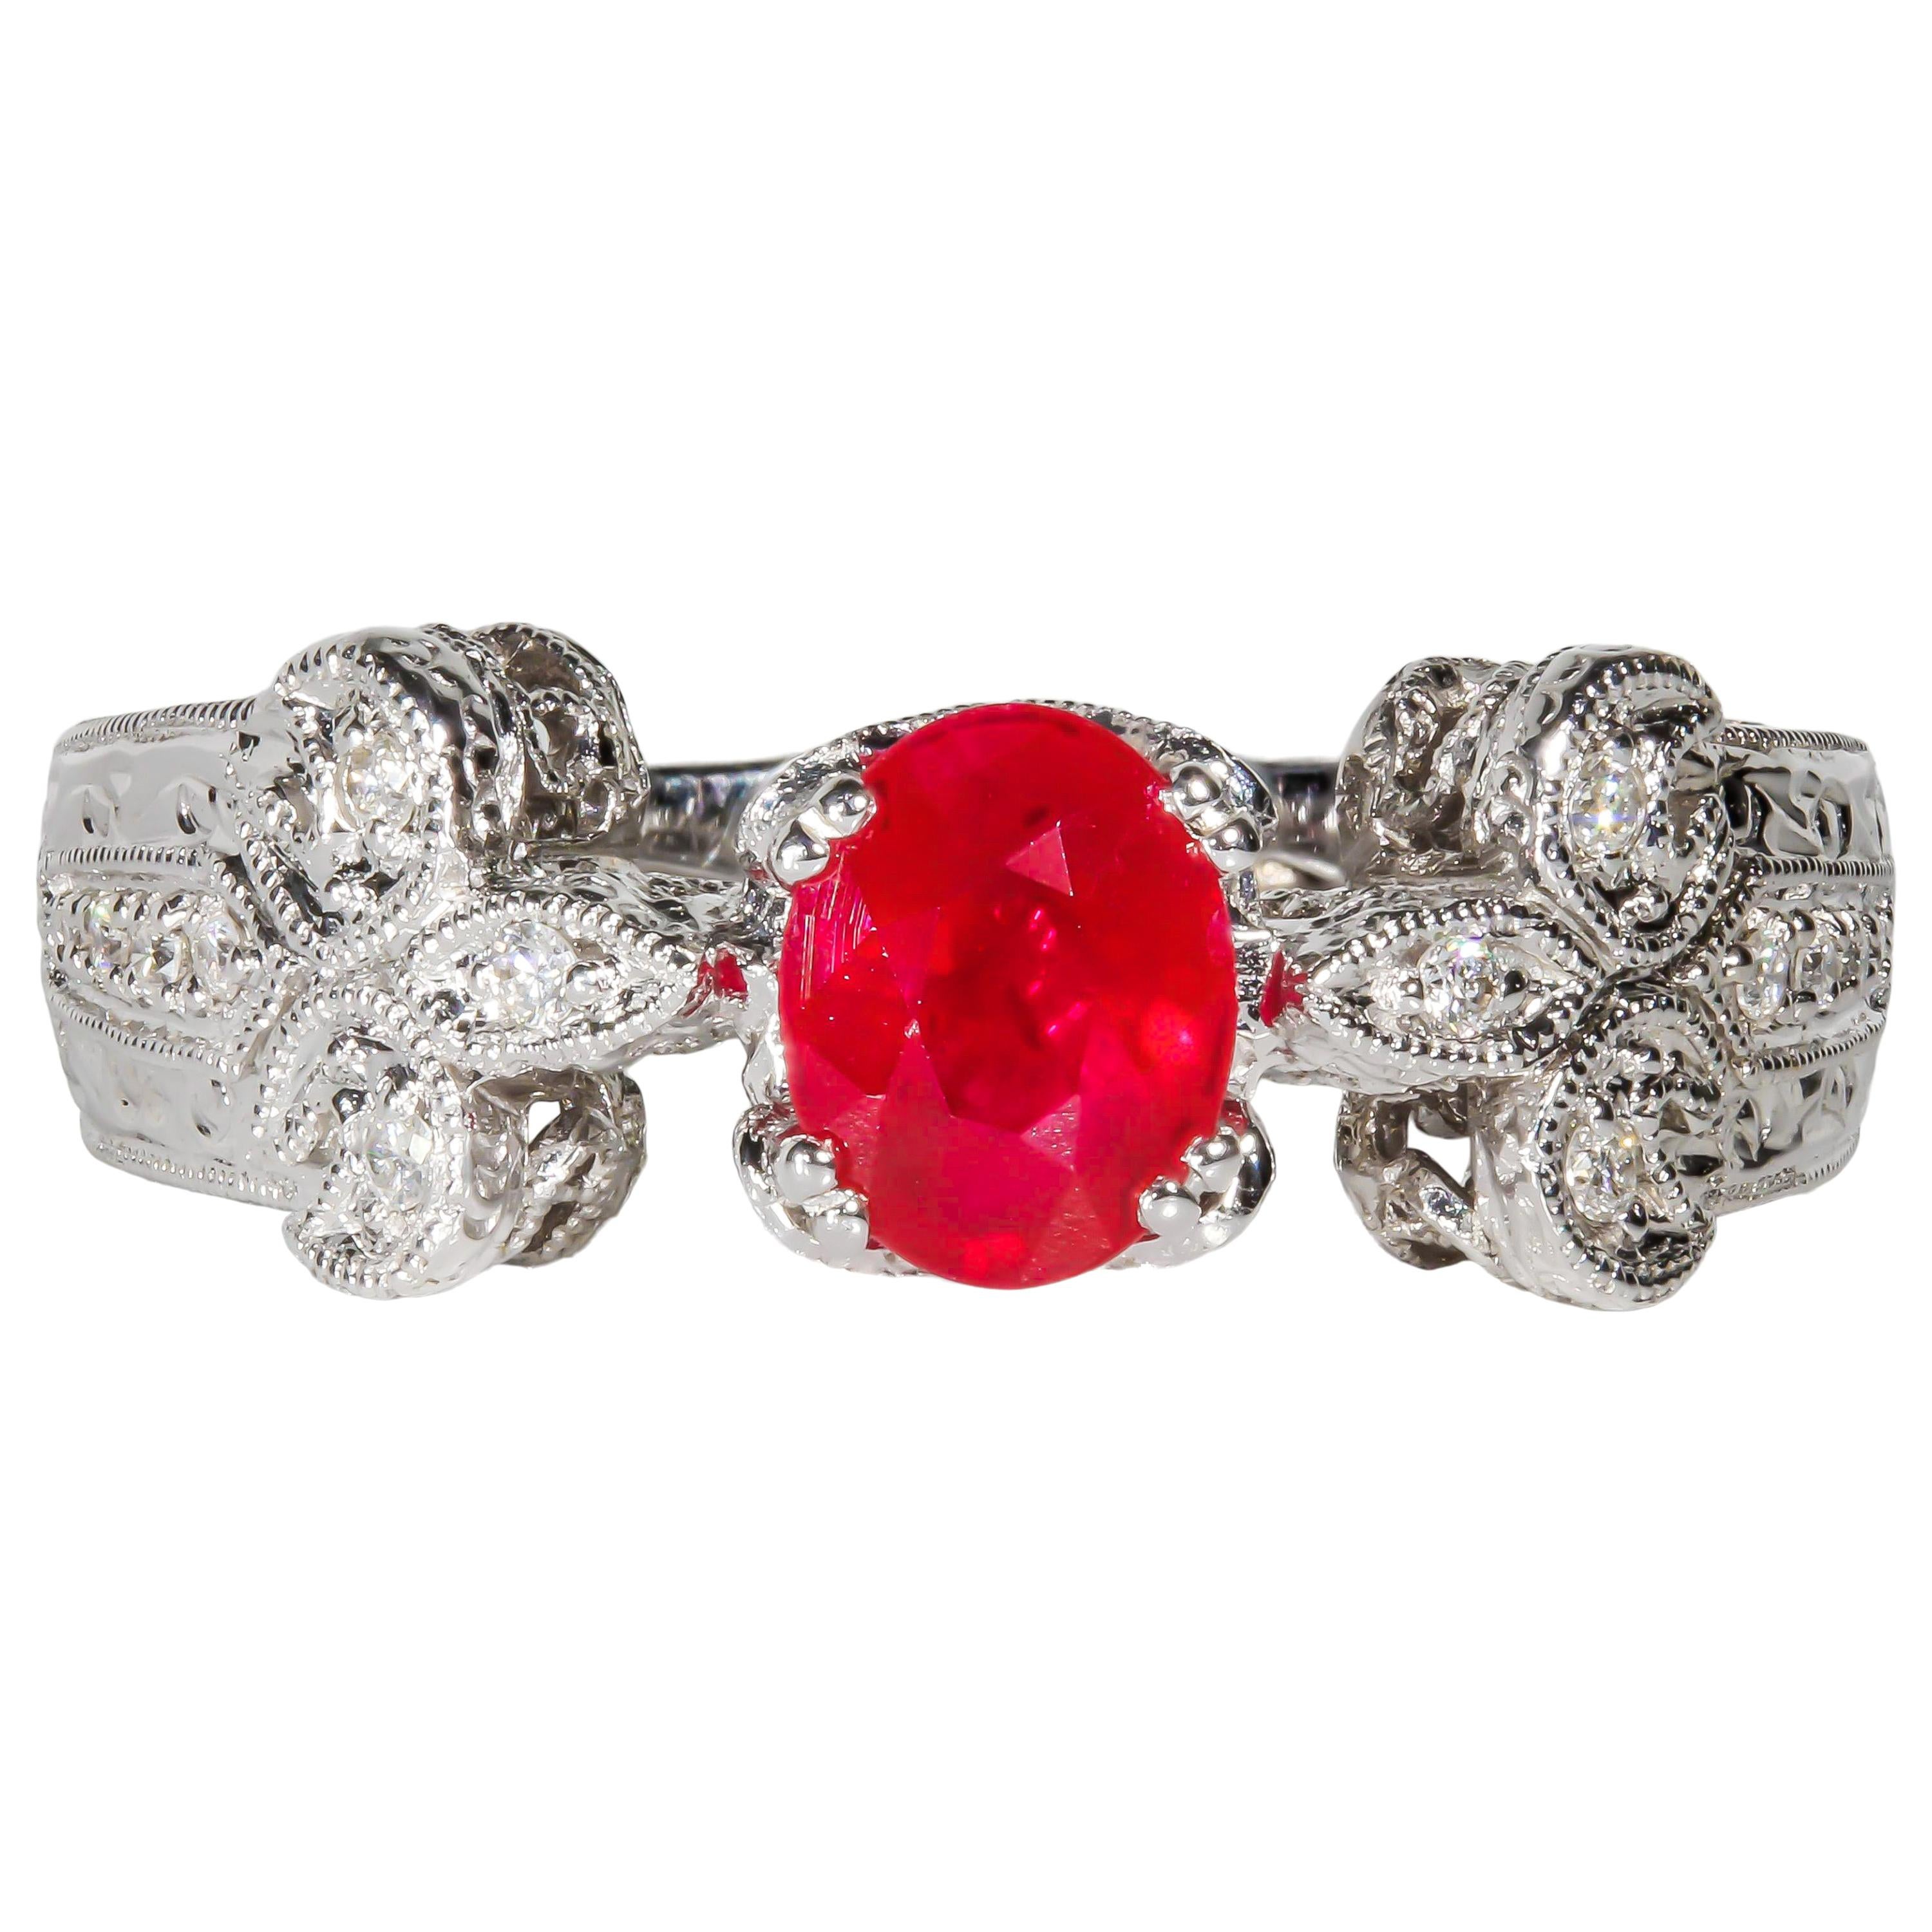 1.16 Carat Ruby and Diamond Cocktail Ring